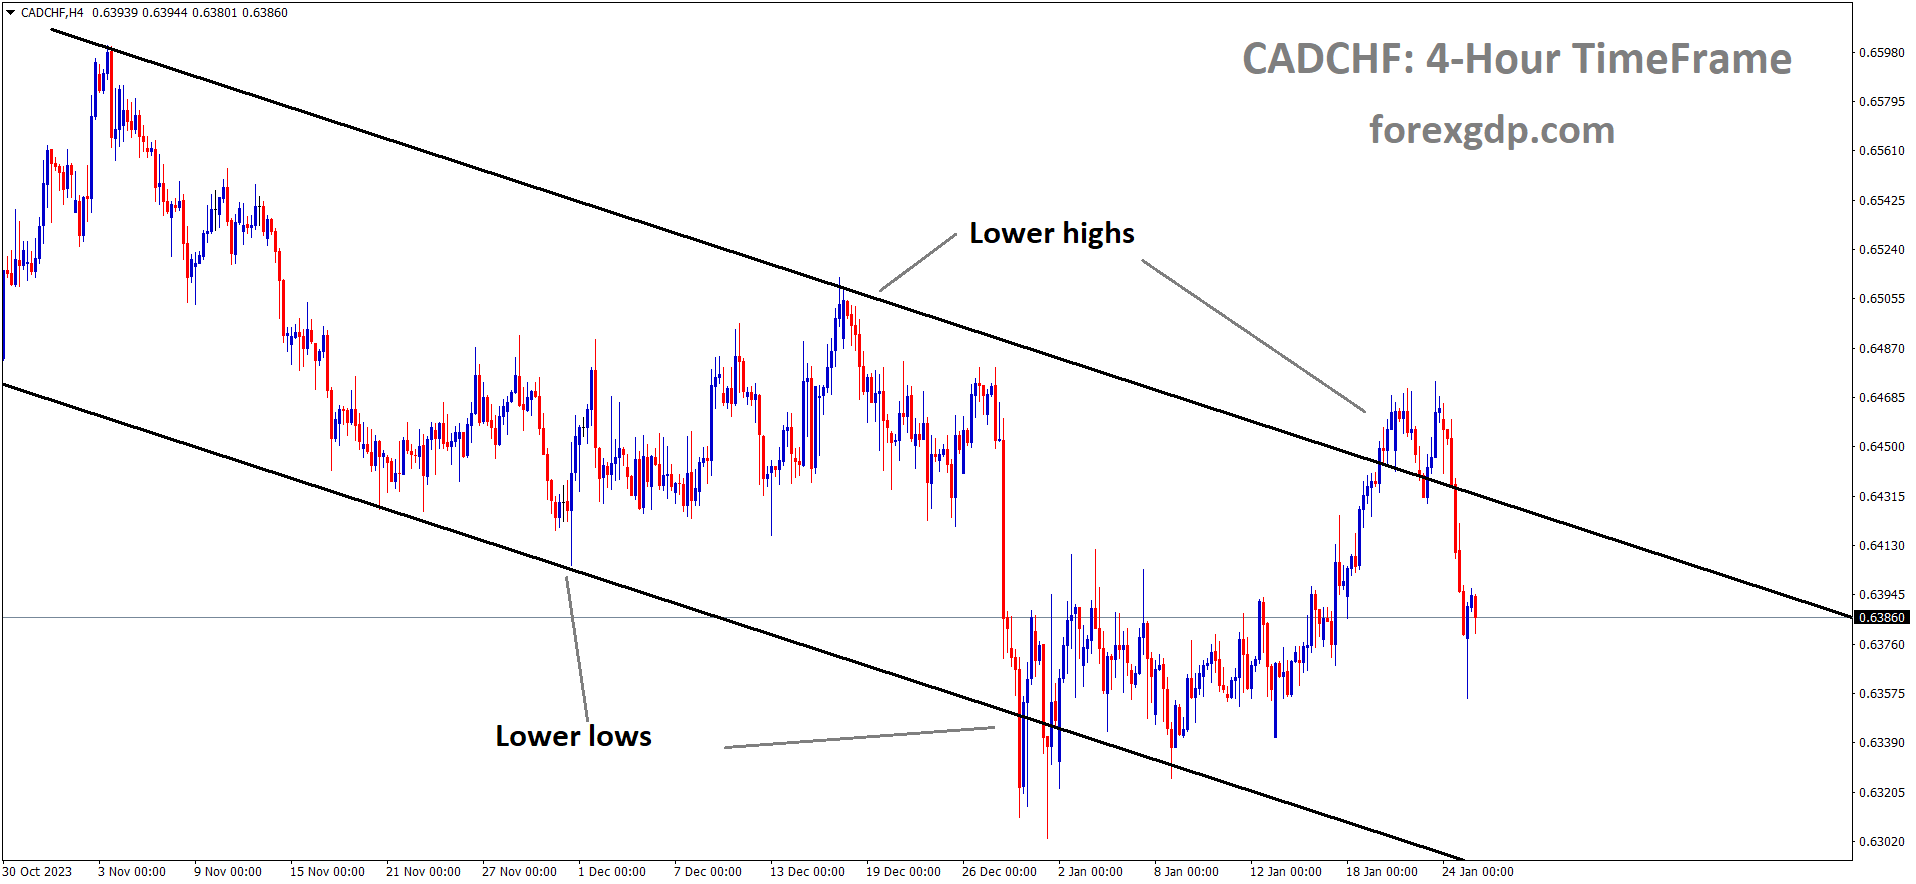 CADCHF is moving in the Descending channel and the market has fallen from the lower high area of the channel